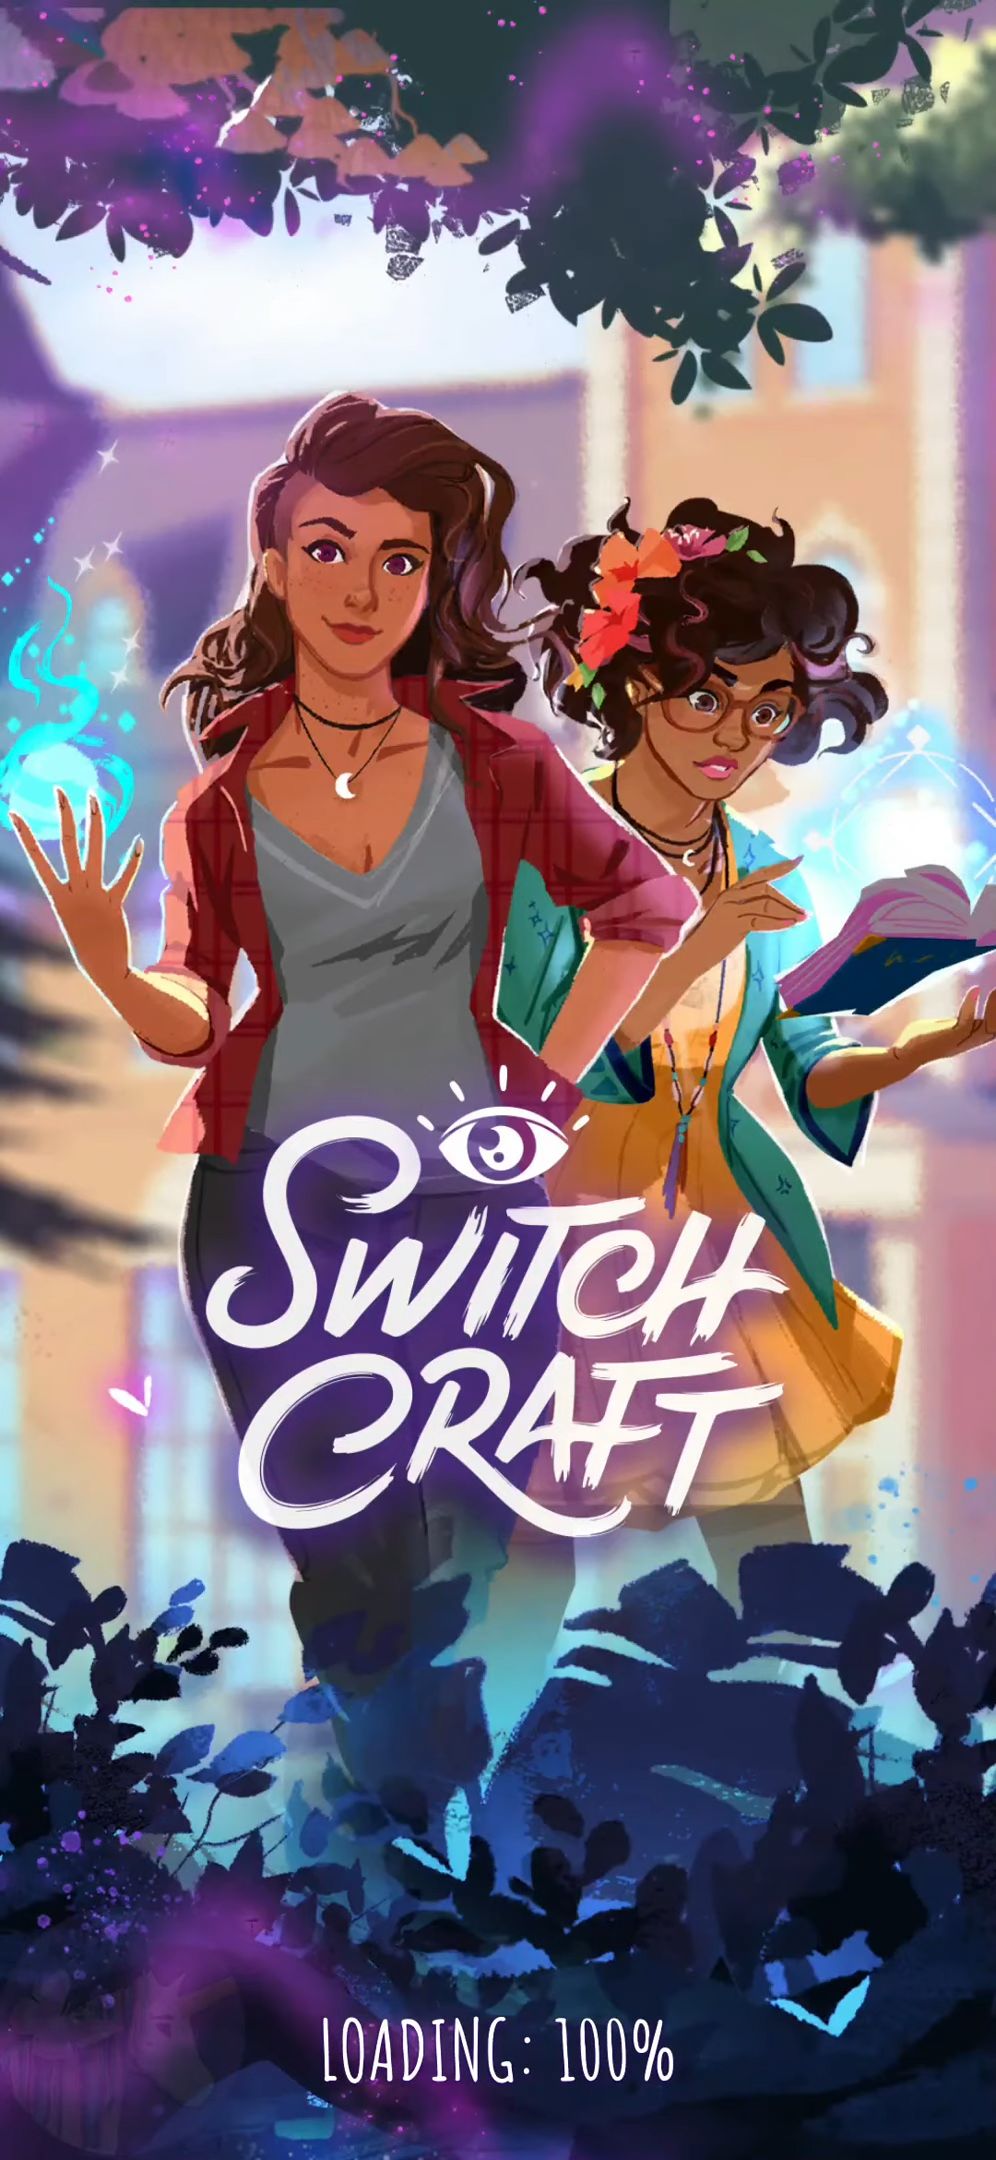 Switchcraft: Magical Match 3